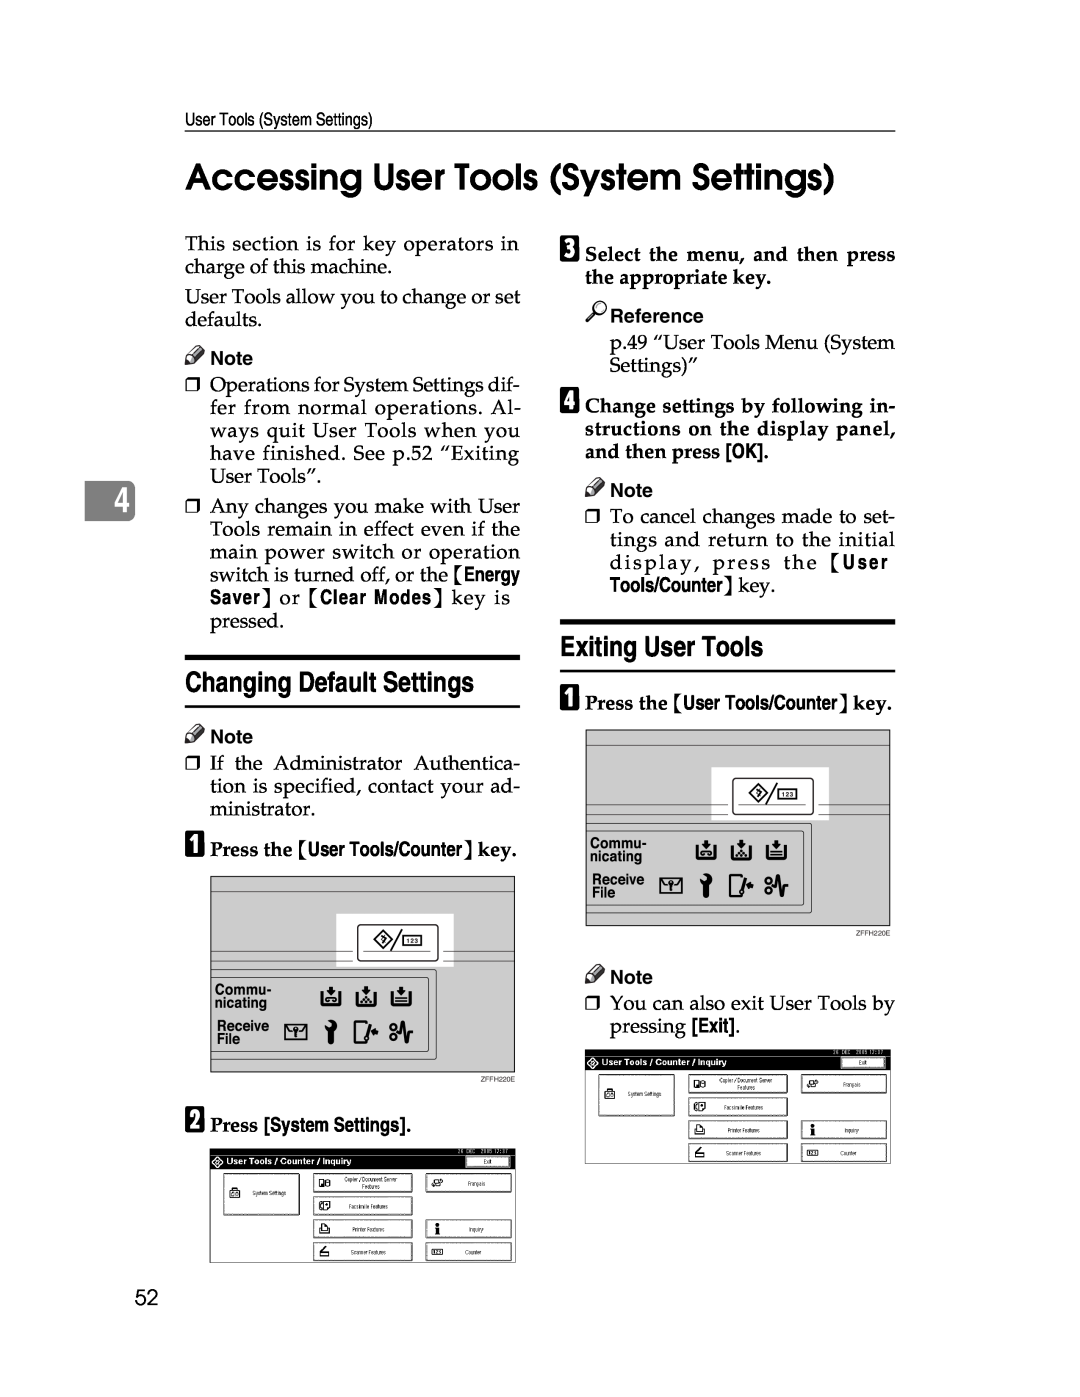 Lanier LD225 Accessing User Tools System Settings, Changing Default Settings, Exiting User Tools, B Press System Settings 